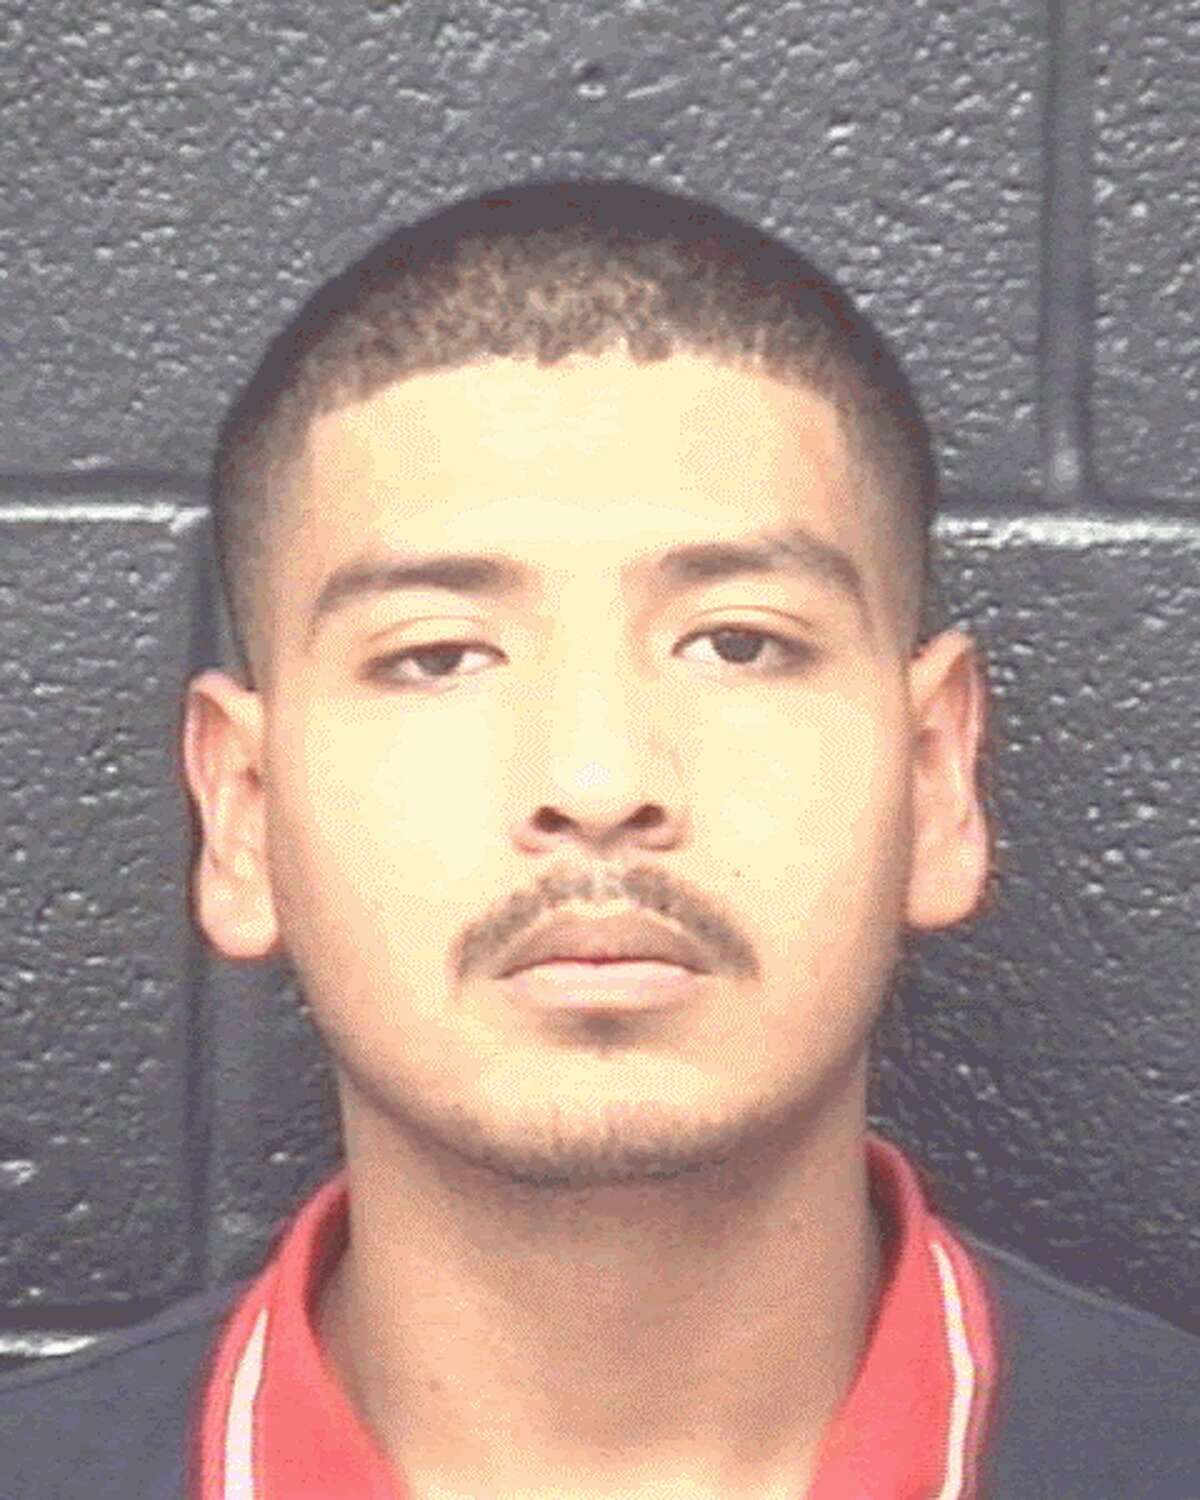 ESPINOZA, BENJAMIN (W M) (20) years of age was arrested on the charge of POSS MARIJ >2OZ